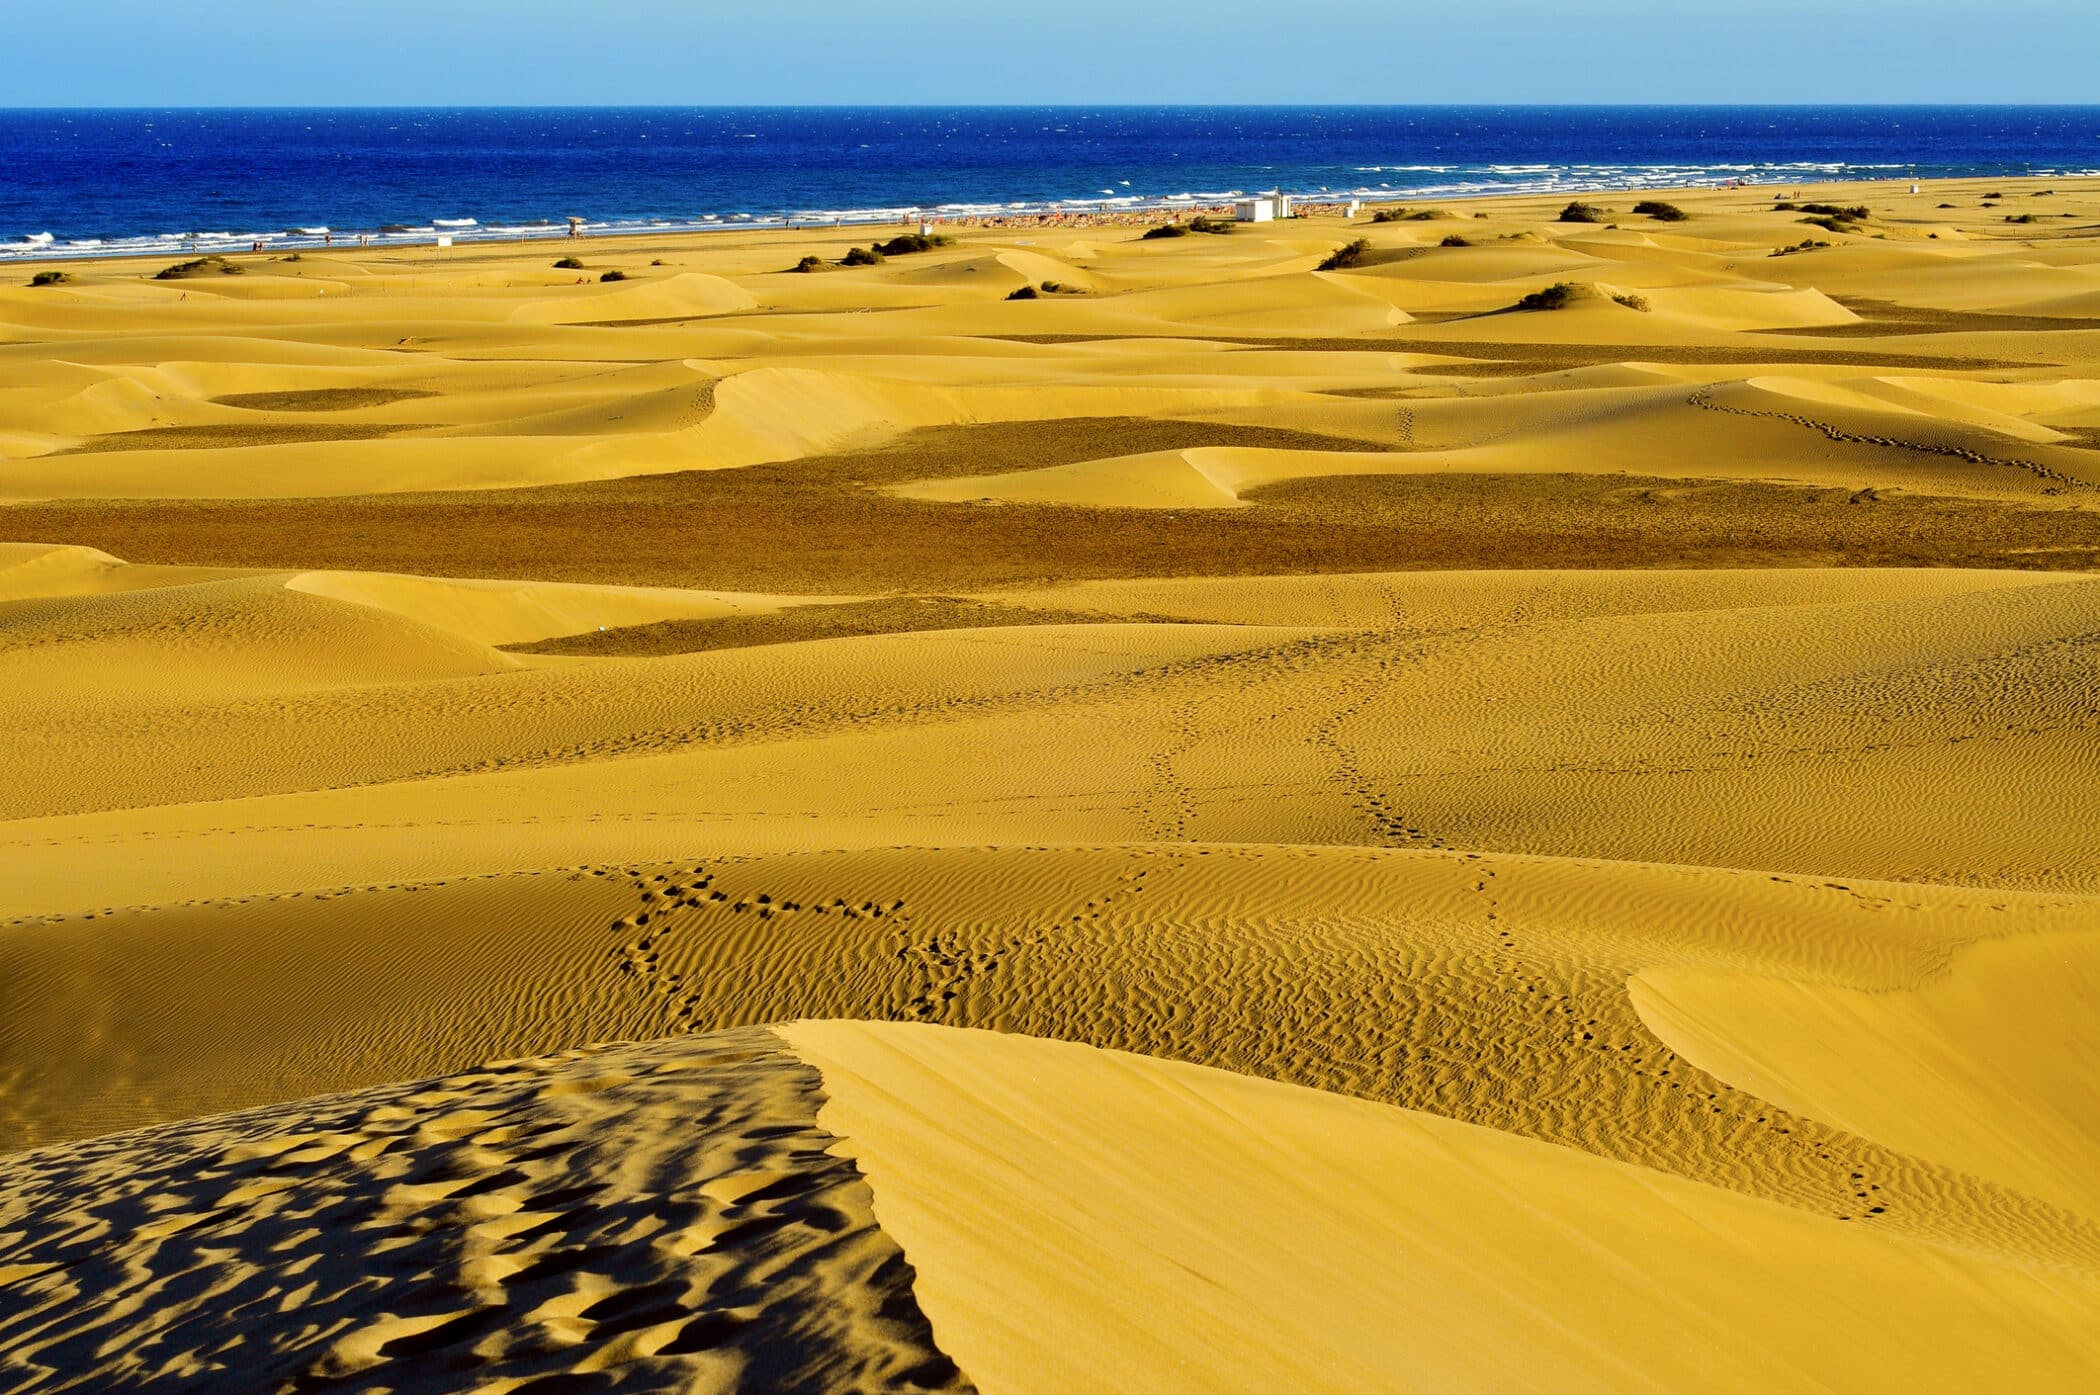 Natural Reserve of Dunes of Maspalomas, in Gran Canaria, Canary Islands, Spain